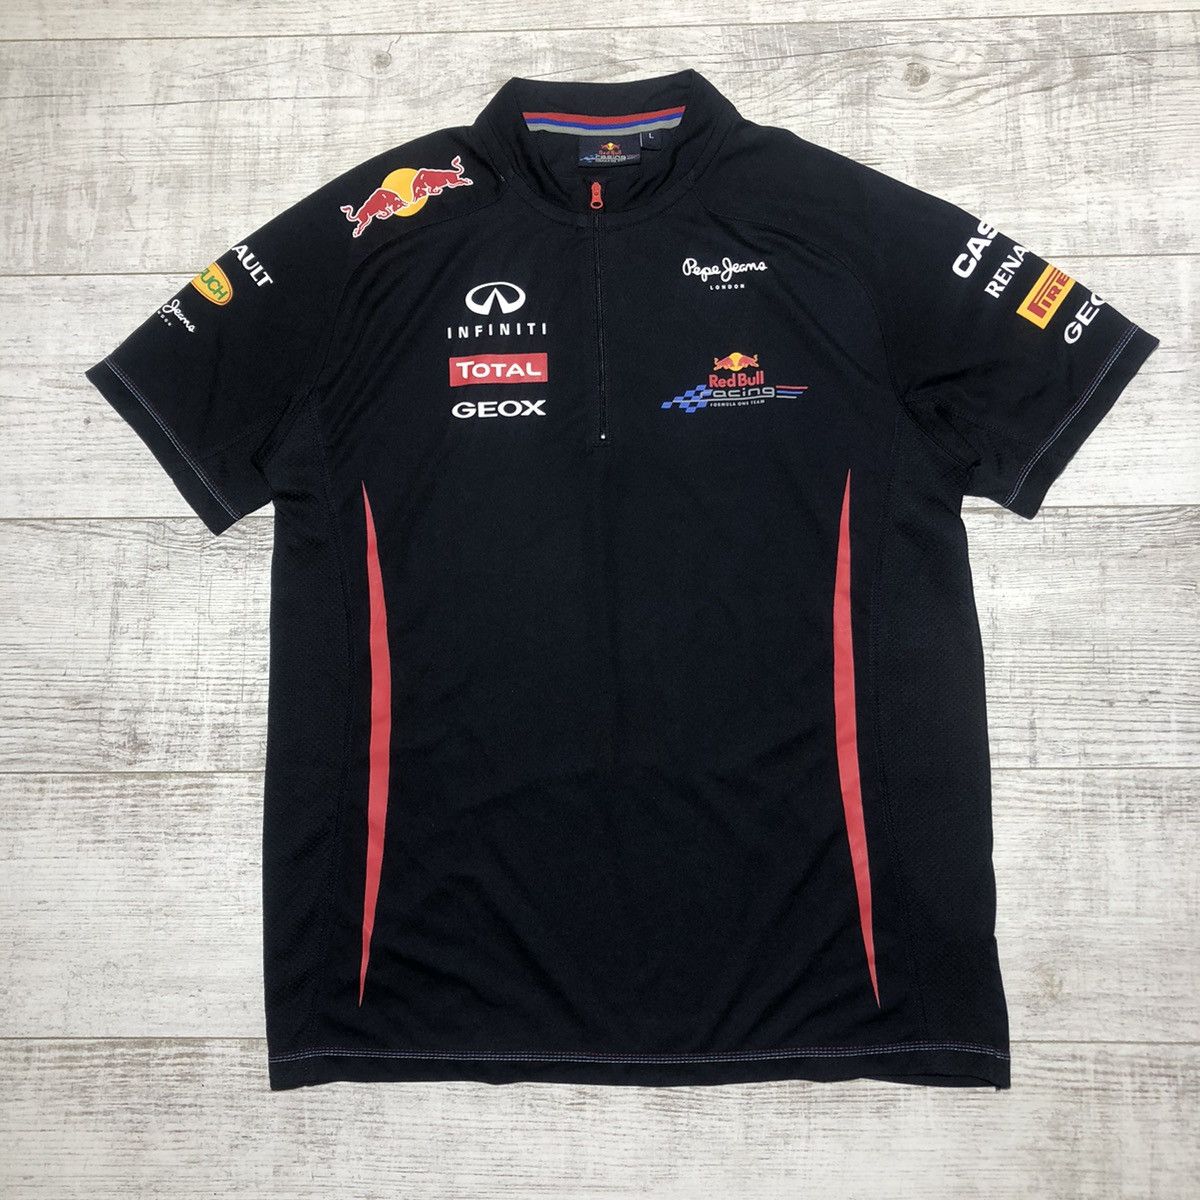 Pepe Jeans Pepe Jeans Red Bull Racing F1 Team | Grailed